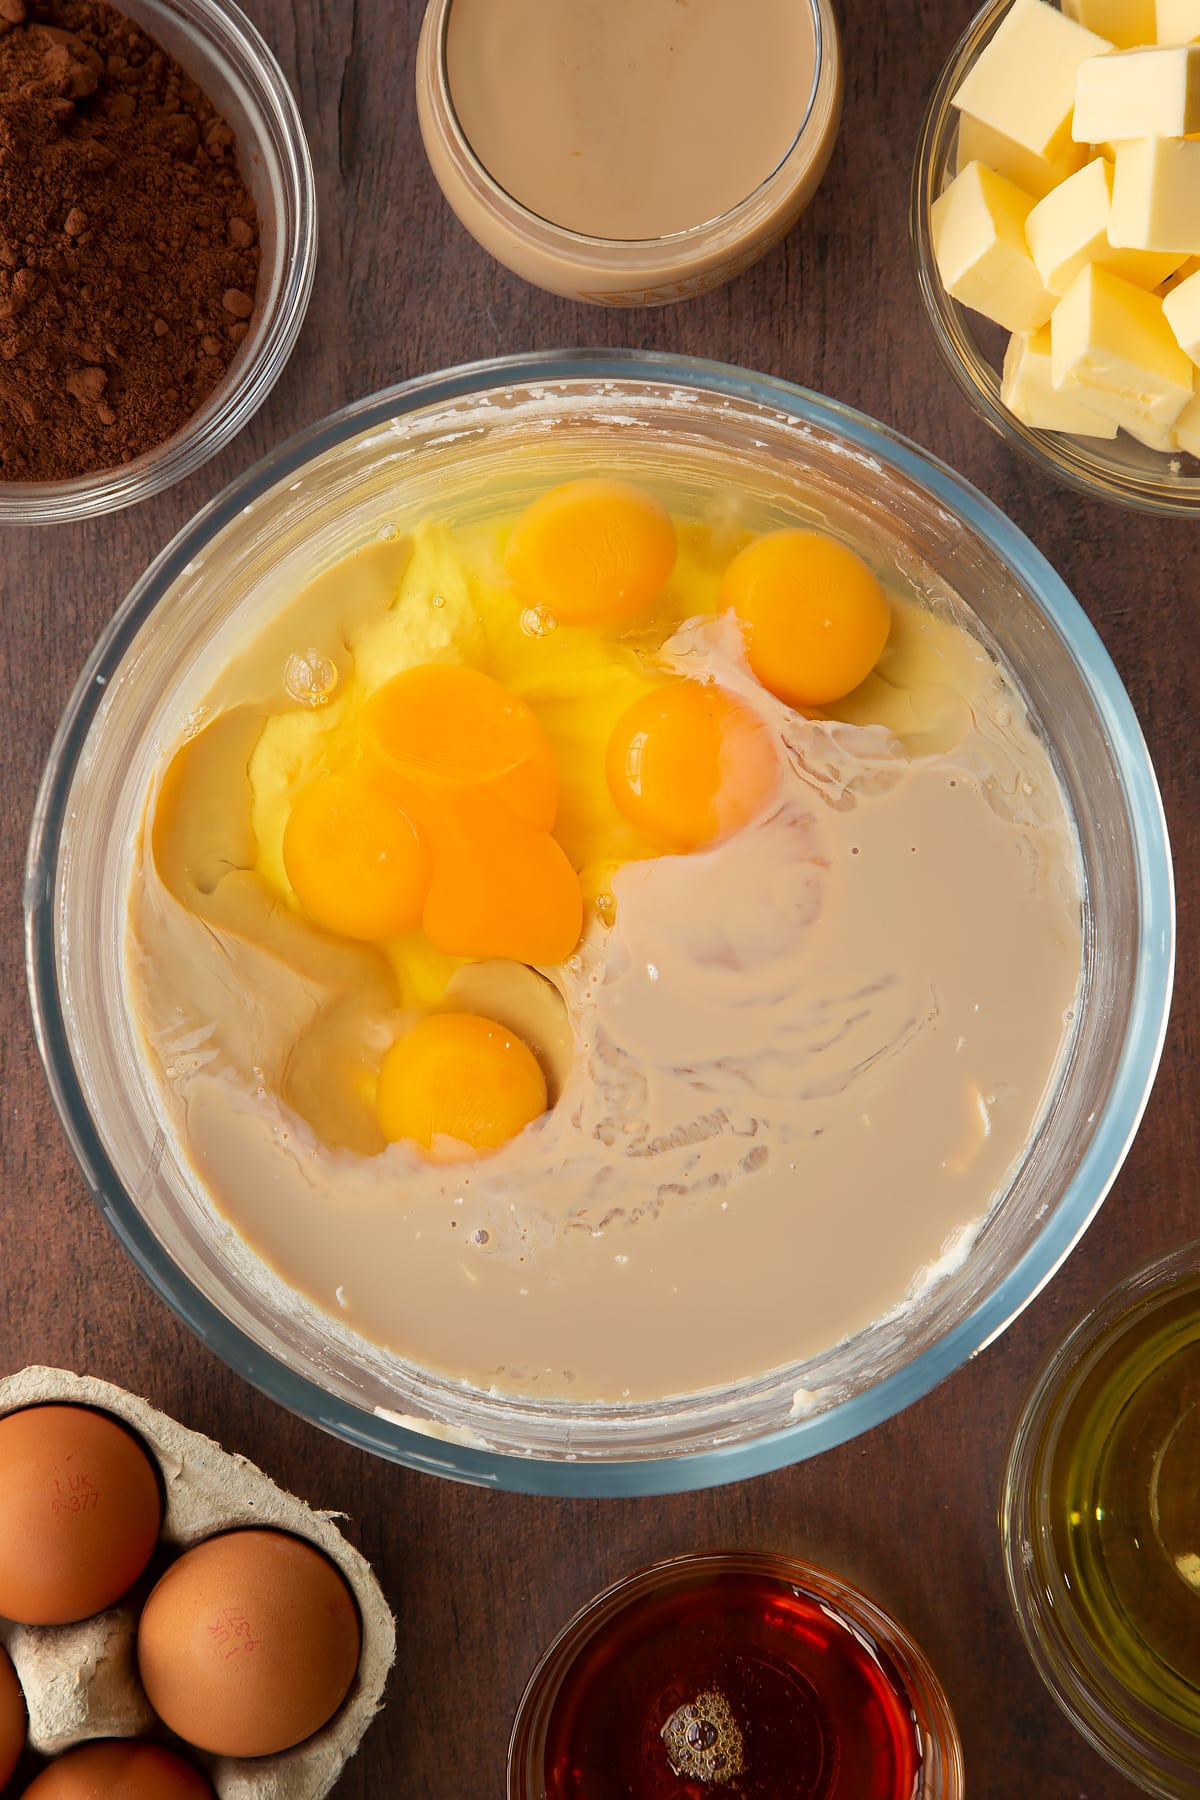 Butter, vegetable oil, caster sugar and golden syrup, whisked together in a glass mixing bowl with egg and Baileys on top. Ingredients to make a Baileys cake surround the bowl.